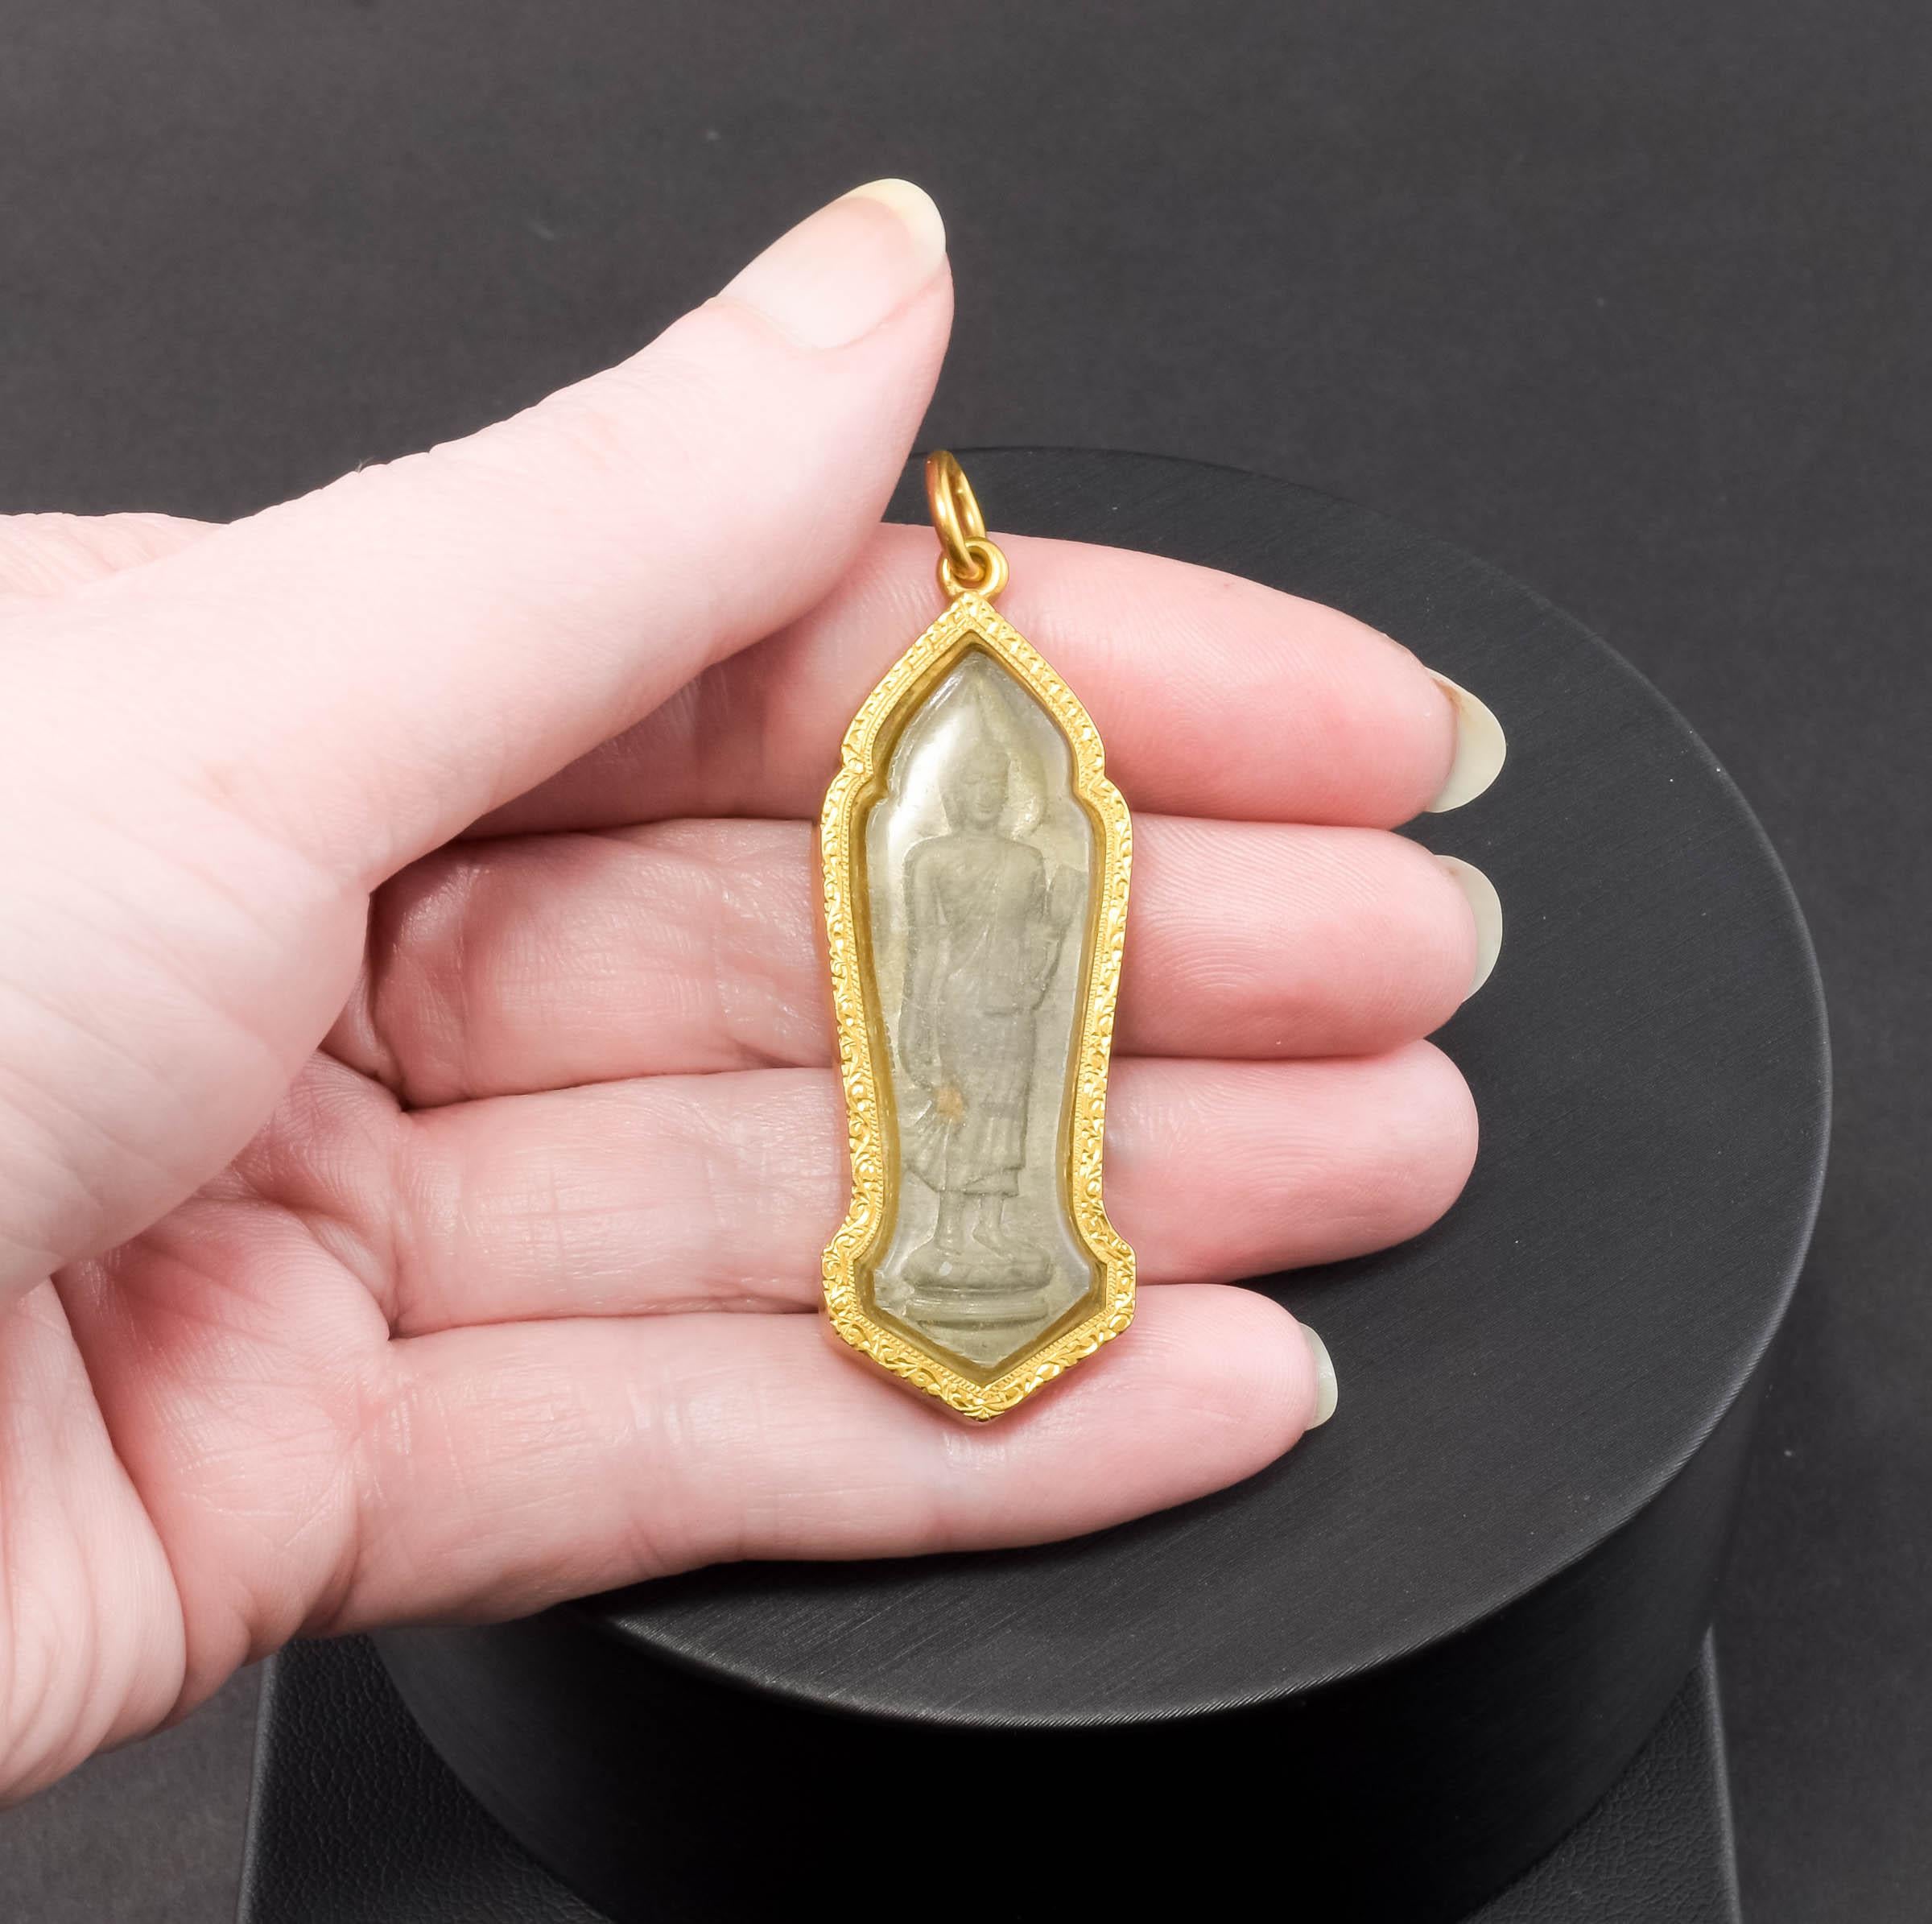 Offered is a particularly beautiful pendant featuring a carved stone Buddha under glass, within a decorative high karat gold frame. The research I have done tells me that this amulet or reliquary is based on a Sukhothai period Buddha. (please note